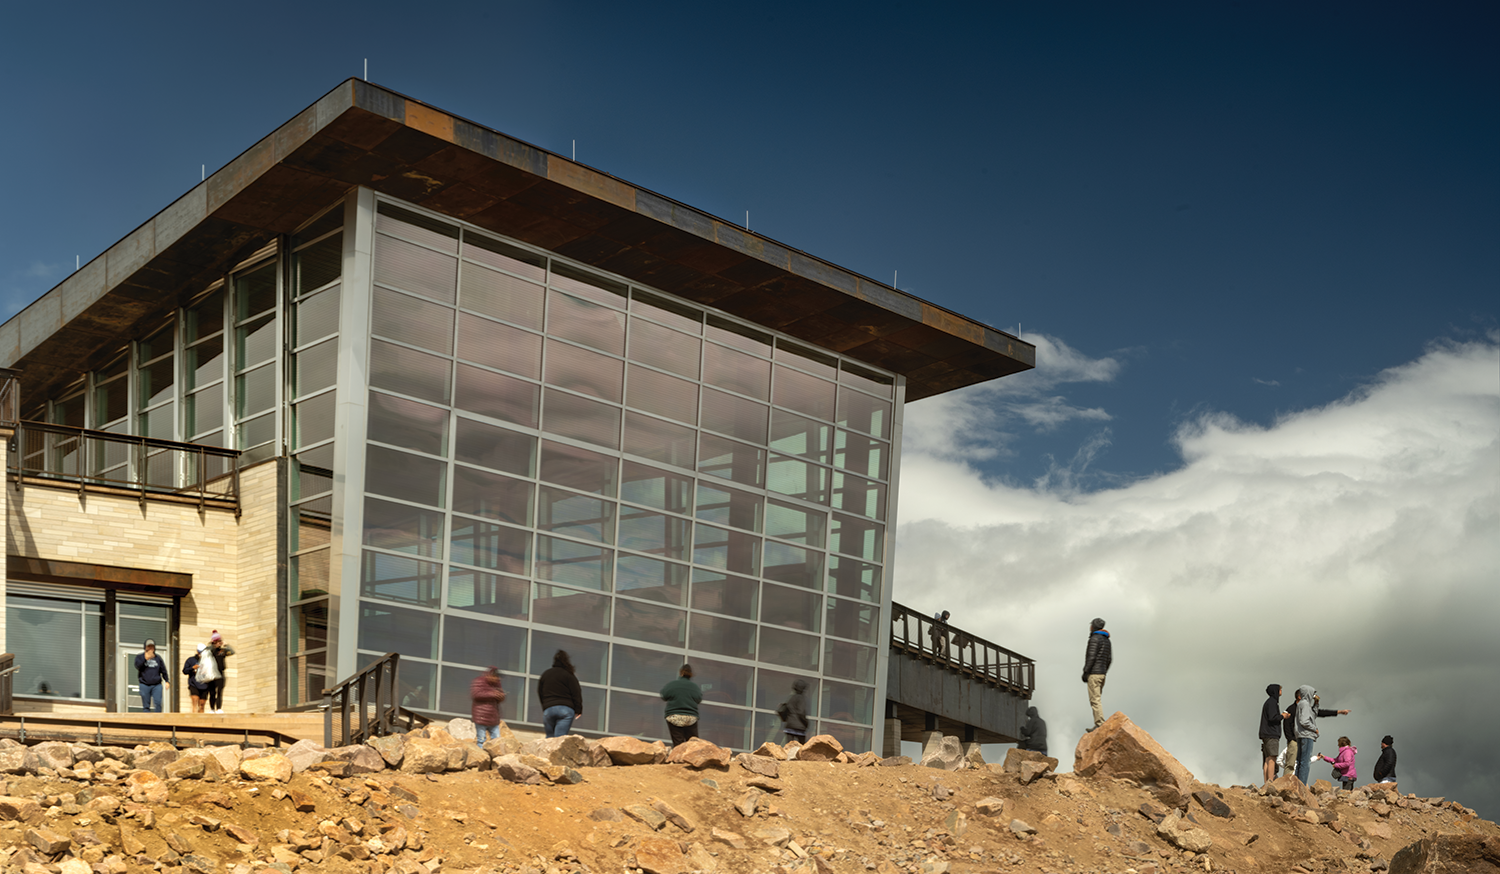 glass entrance at Pikes Peak visitor center